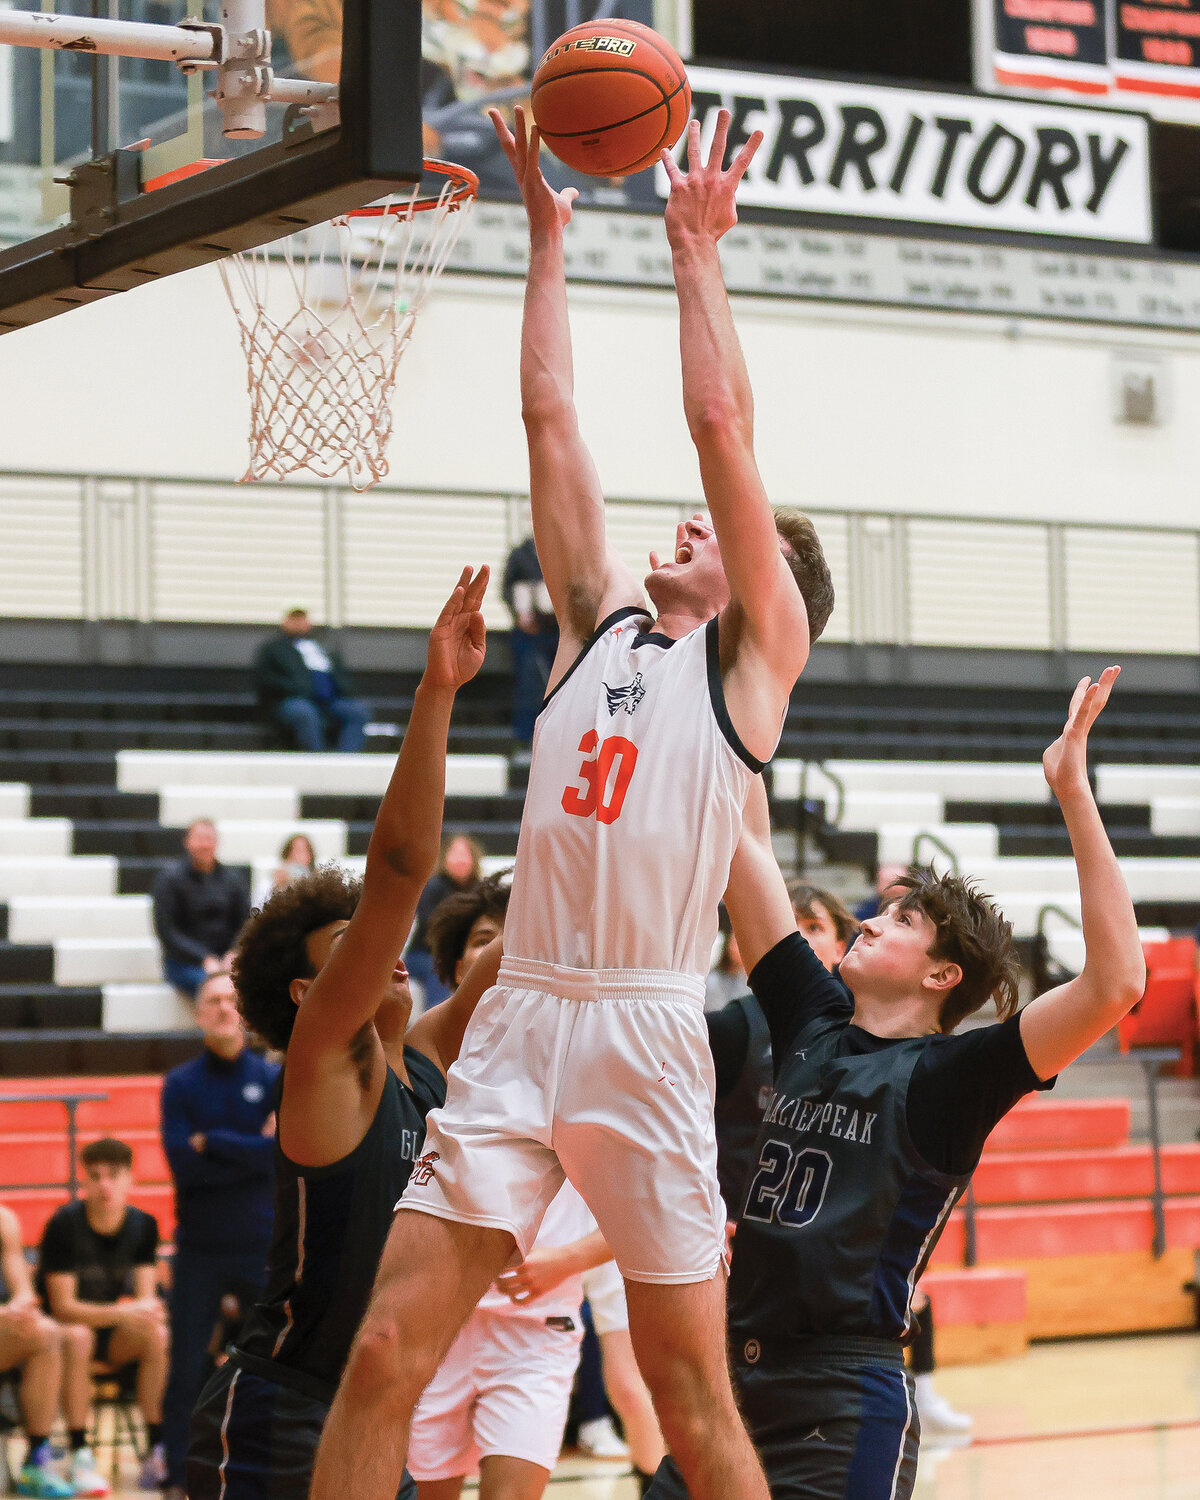 Battle Ground's Boston Walker drives into the lane in the Tigers’ third game of the week, which resulted in a 69-36 loss to Glacier Peak High School on Friday, Dec. 1.